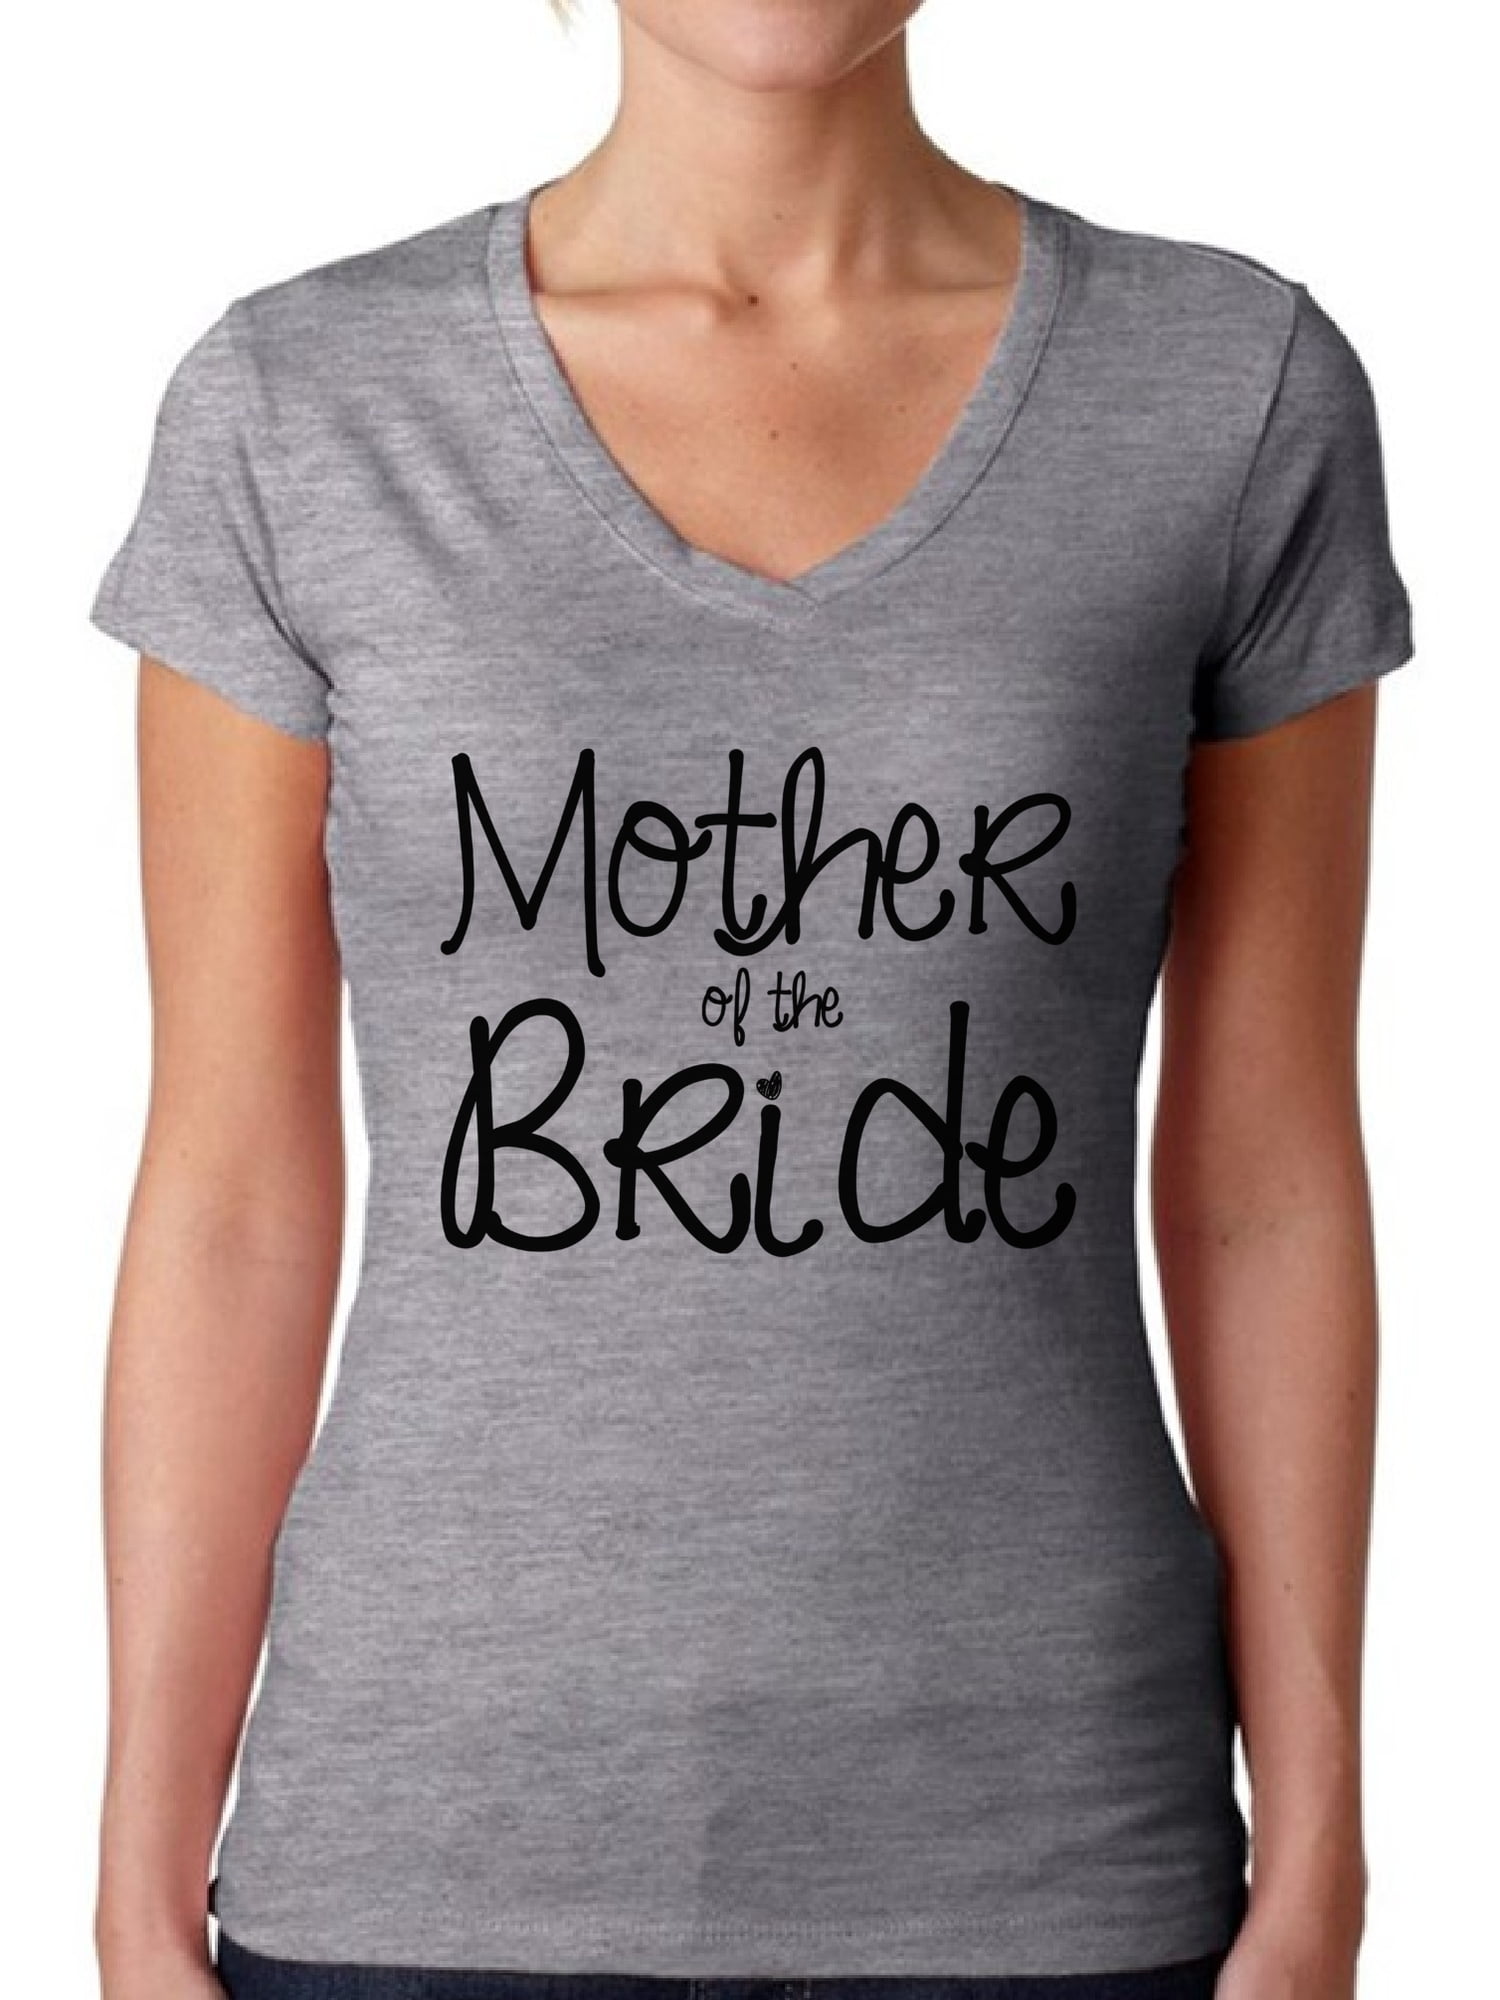 Awkward Styles Women's Mother Of The Bride Cool V-neck T-shirt Party ...